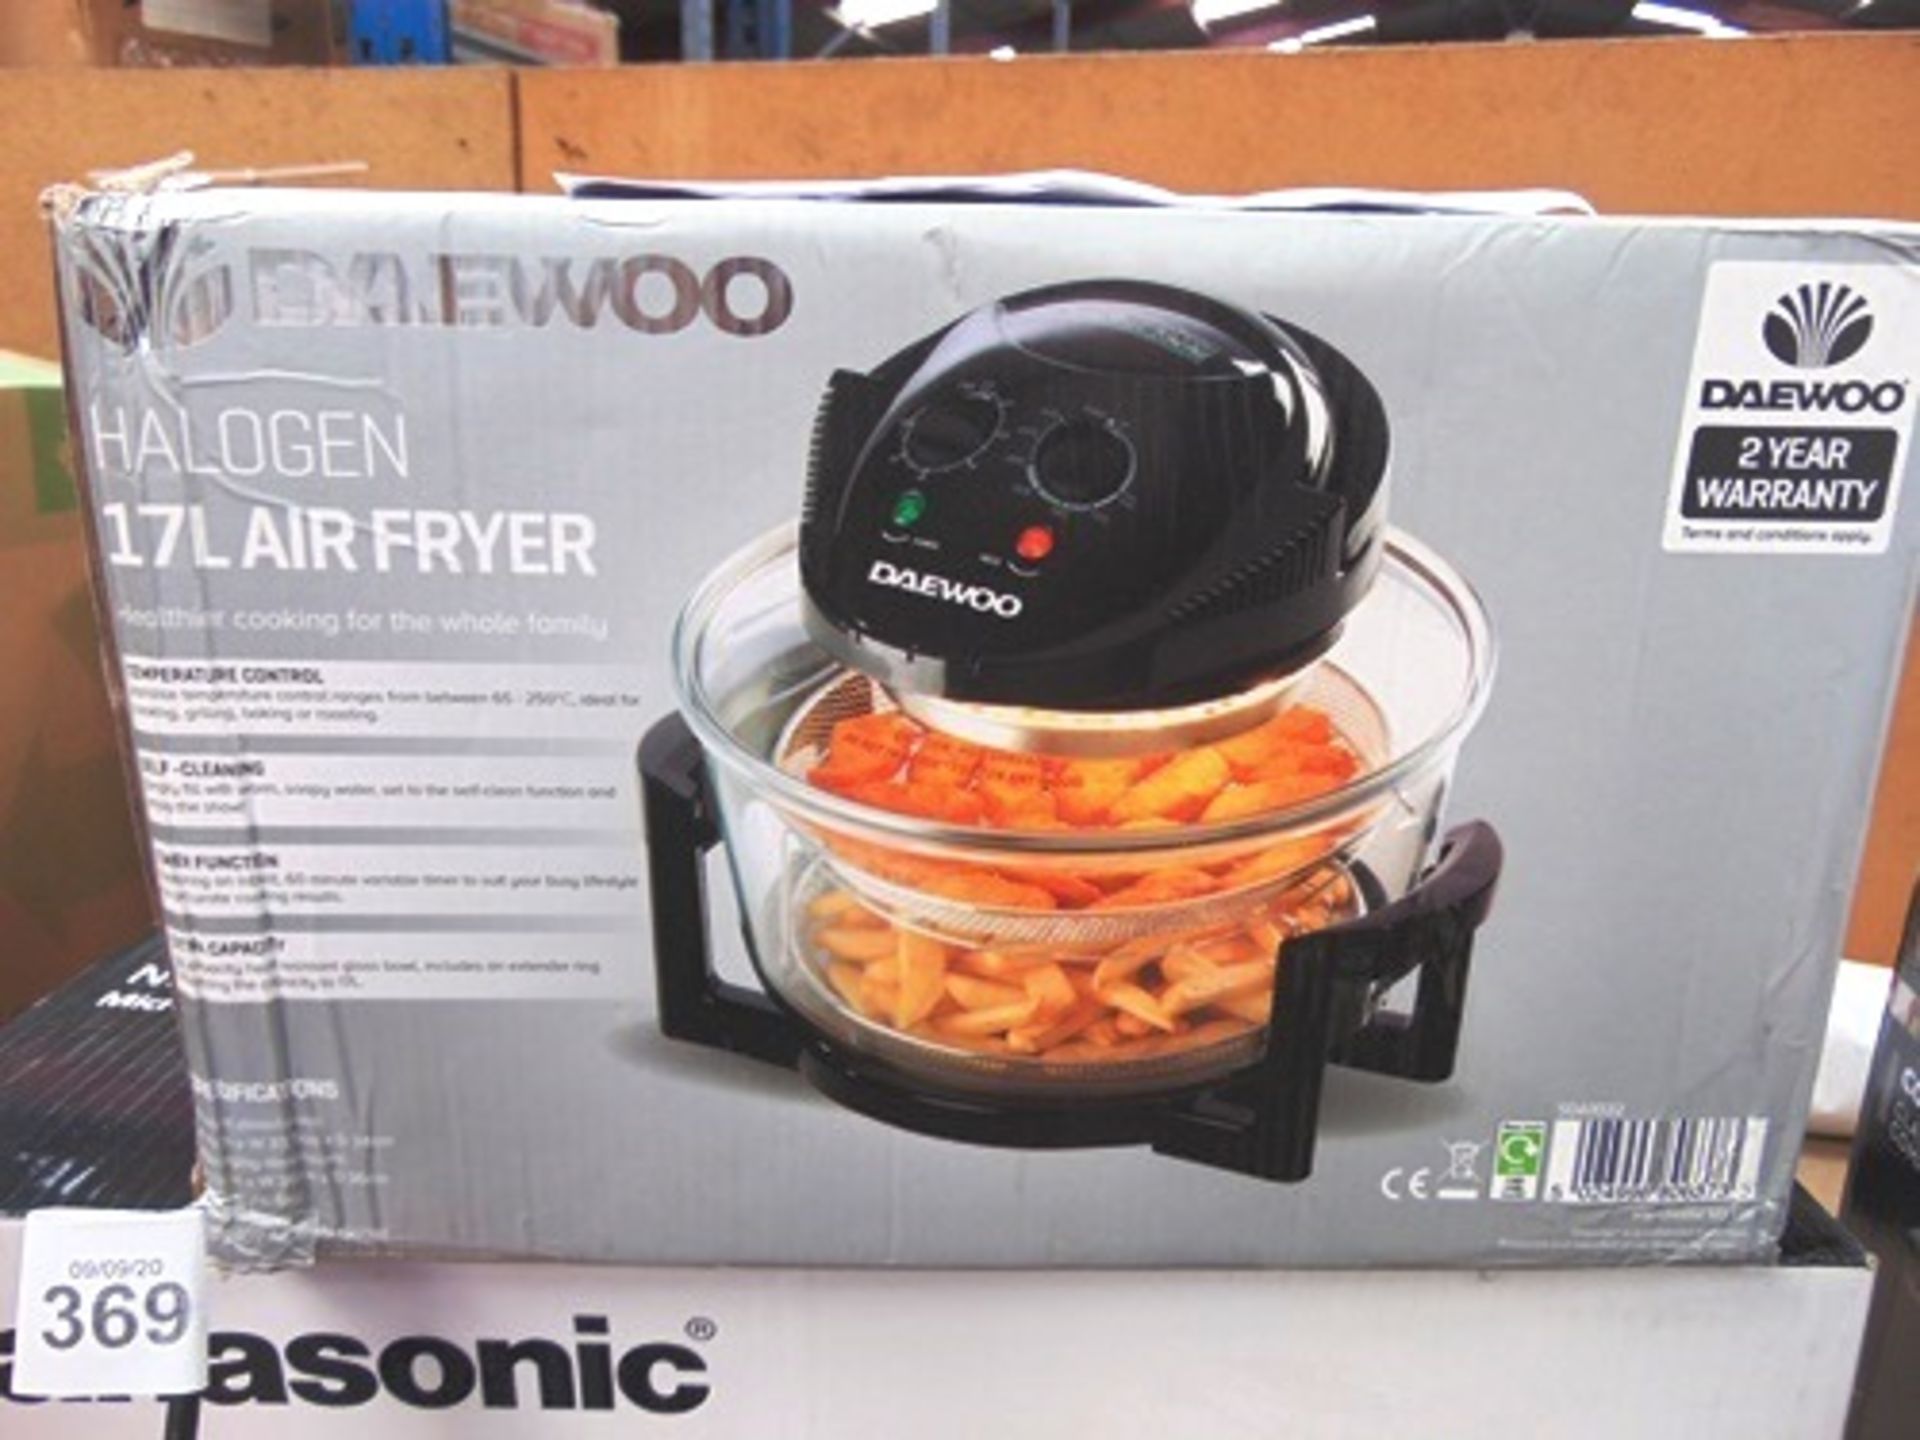 Panasonic 20ltr 800W microwave, model NN-E28JBM, together with a Daewoo halogen 17ltr air fryer, - Image 2 of 5